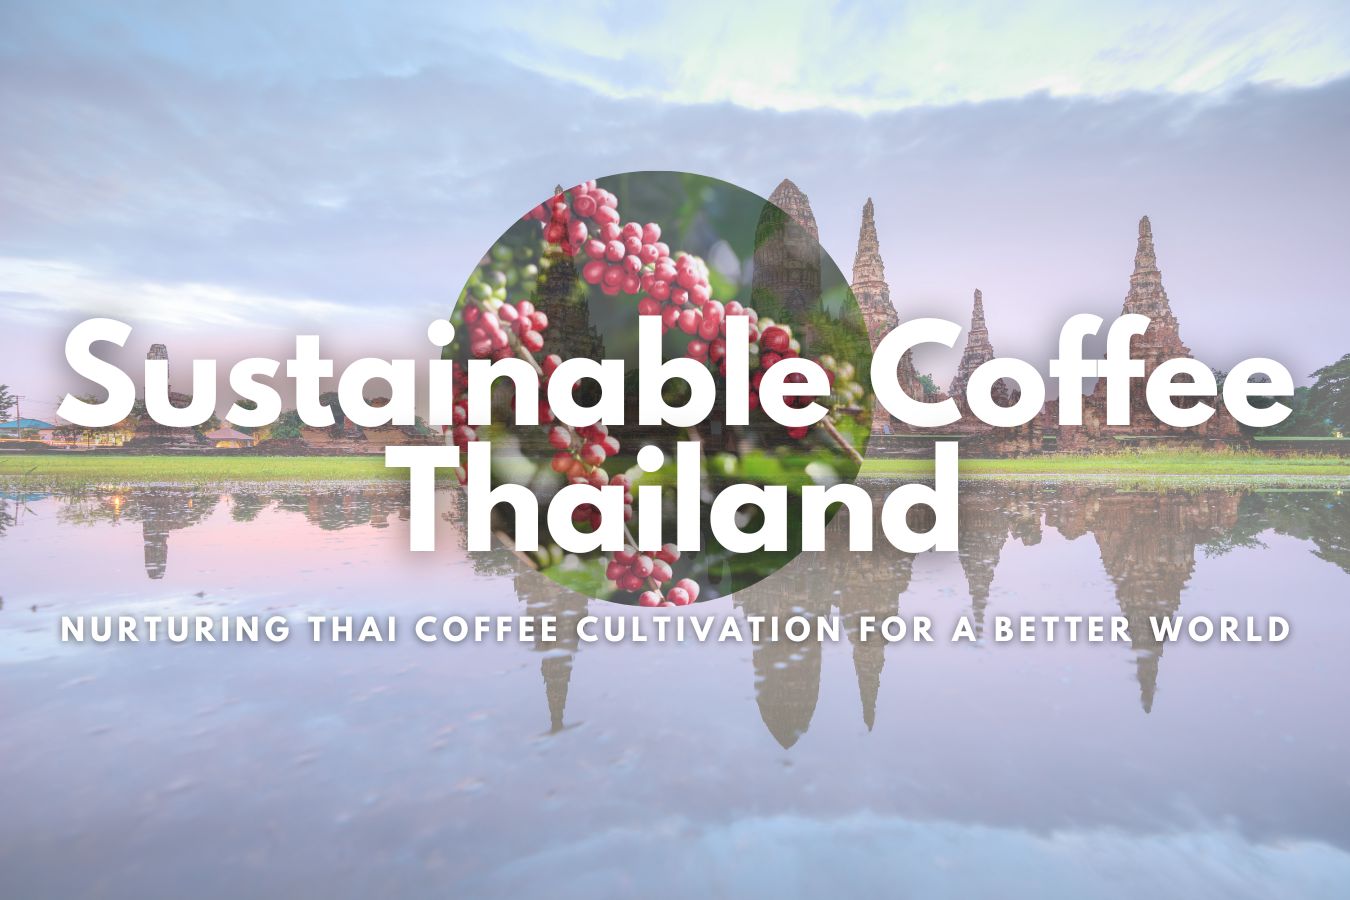 Sustainable Coffee Thailand Nurturing Thai Coffee Cultivation for a Better World